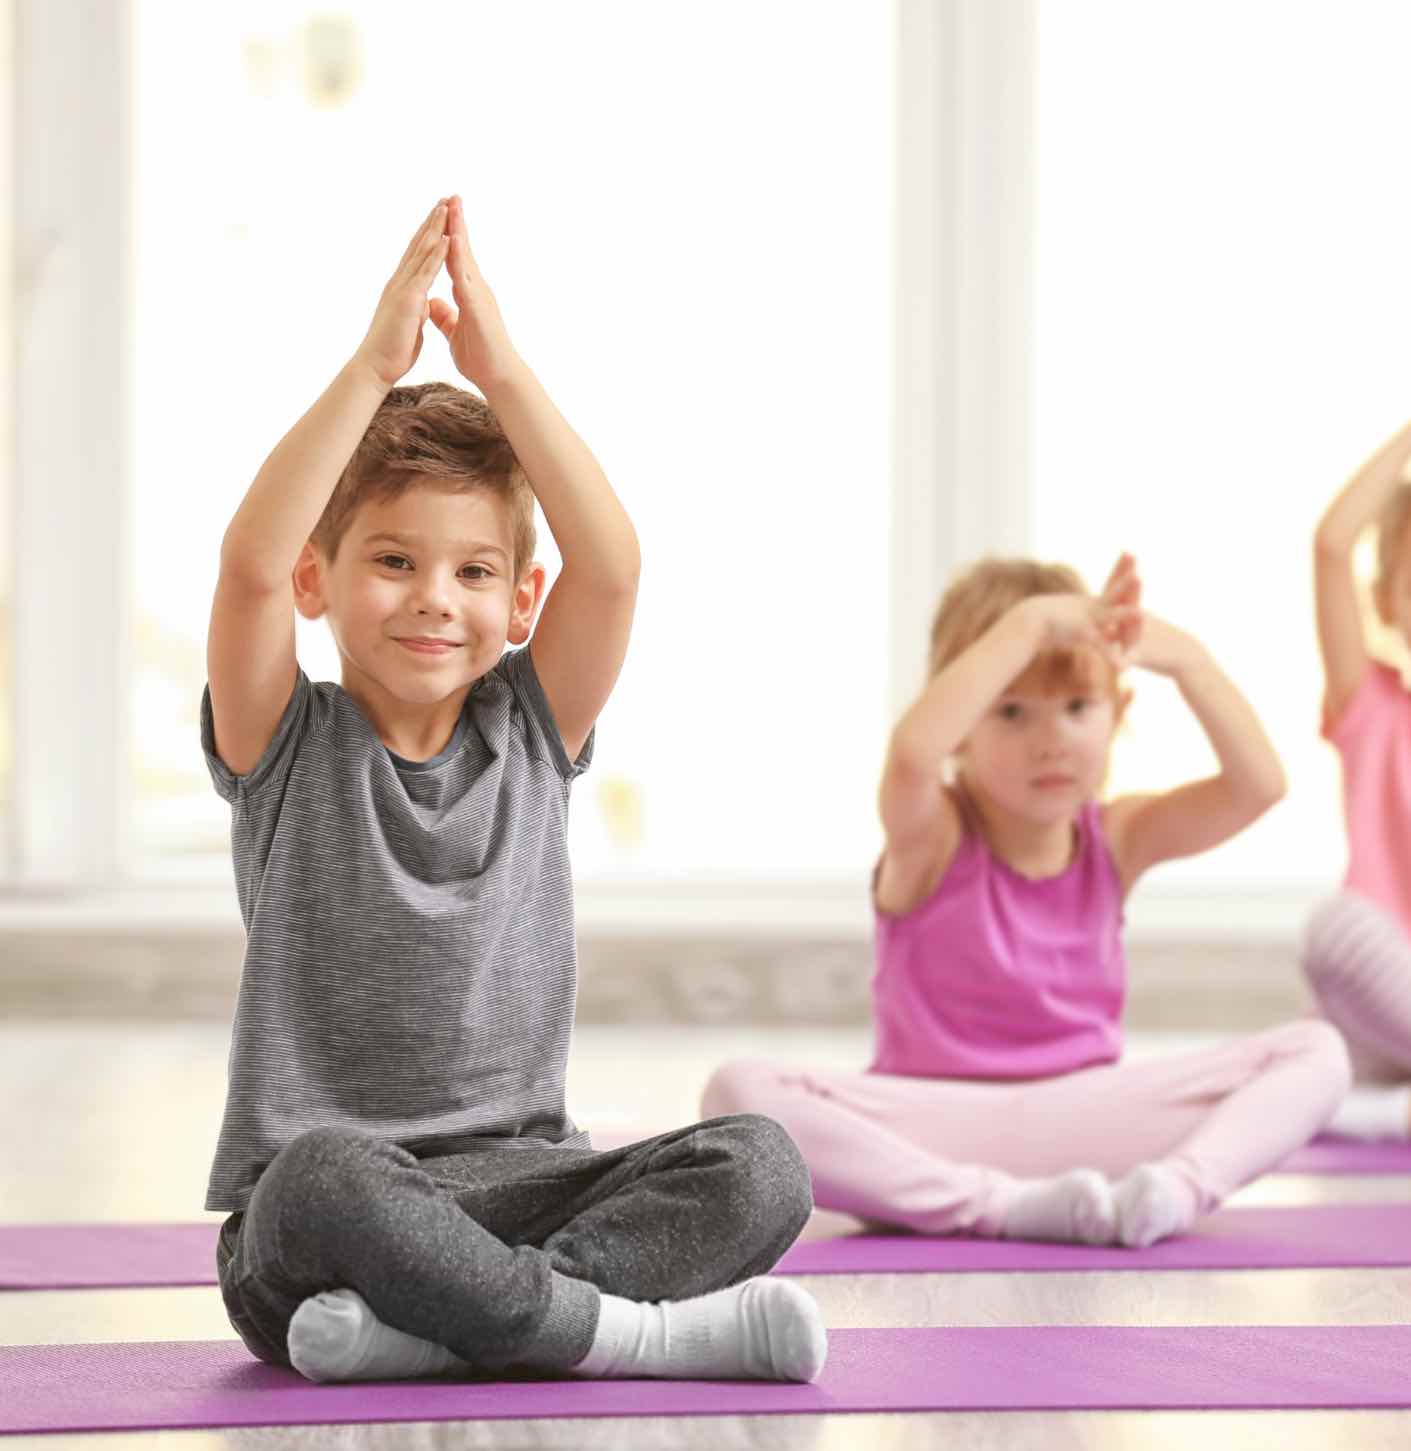 These kids enjoy practicing mindfulness through yoga - learn more tips with Romp n' Roll North Raleigh!